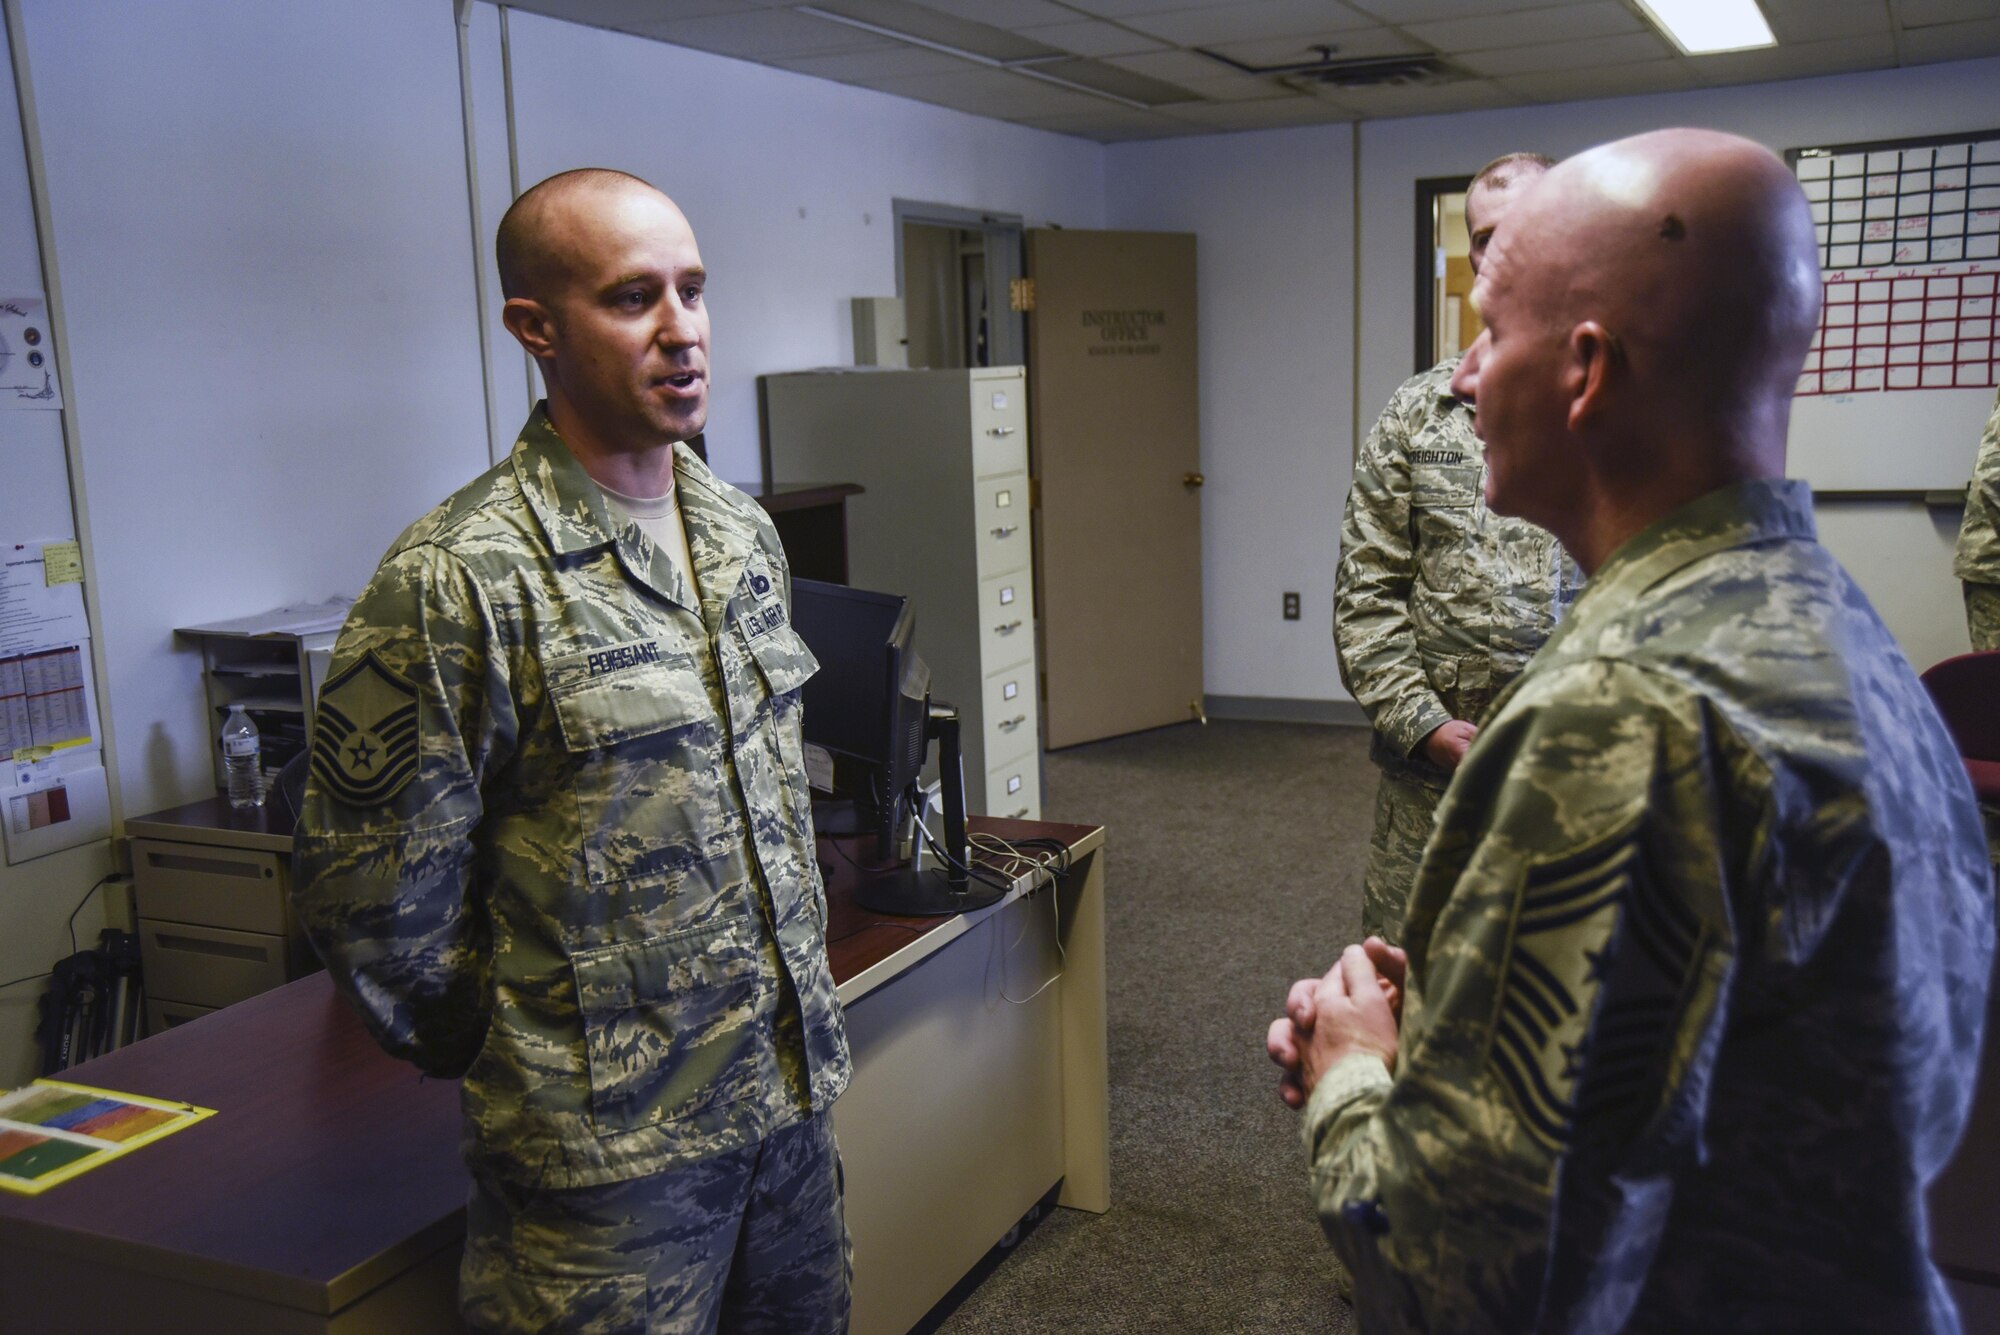 Chief Master Sgt. Thomas F. Good, Twentieth Air Force Command Chief, speaks with Master Sgt. Kelly Poissant, 377th Security Support Squadron superintendent of training, at Kirtland Air Force Base, July 18. Poissant explained the training schedule for defenders on Kirtland. (U.S. Air Force Photo/Senior Airman Chandler Baker)